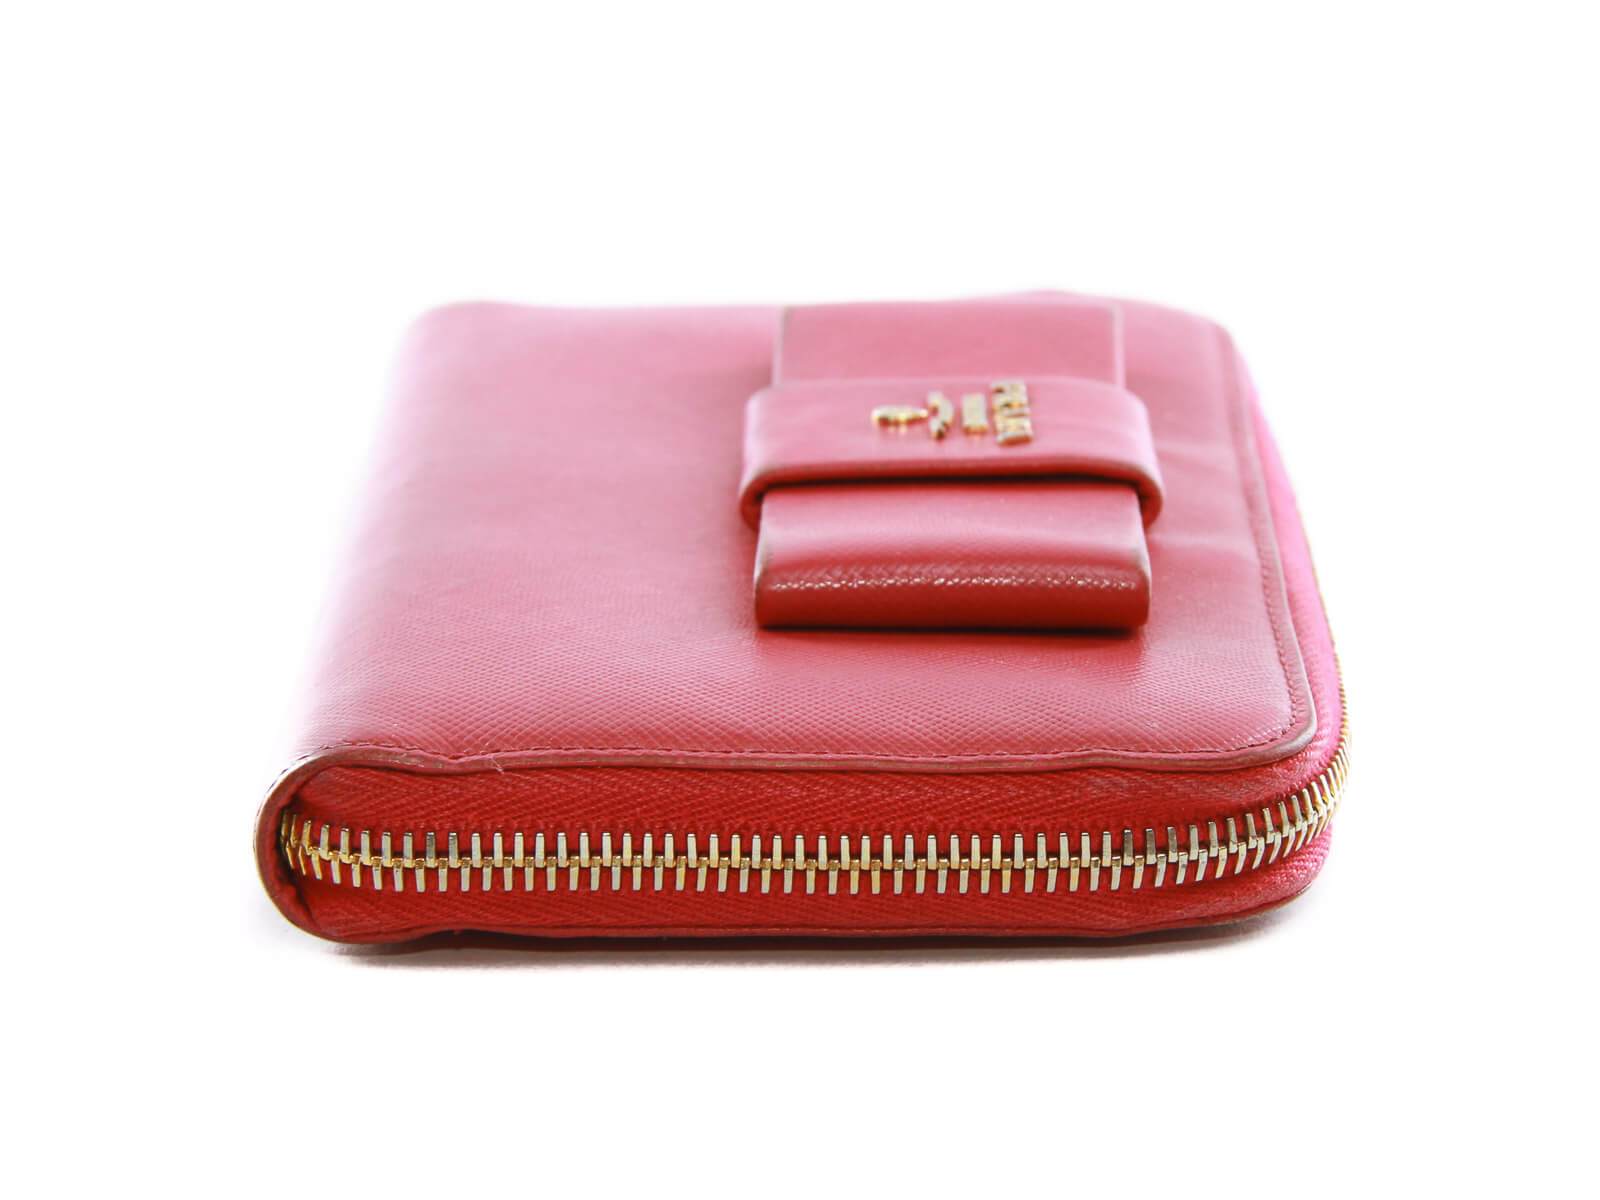 Prada Leather Pouch - Pink Wallets, Accessories - PRA888808